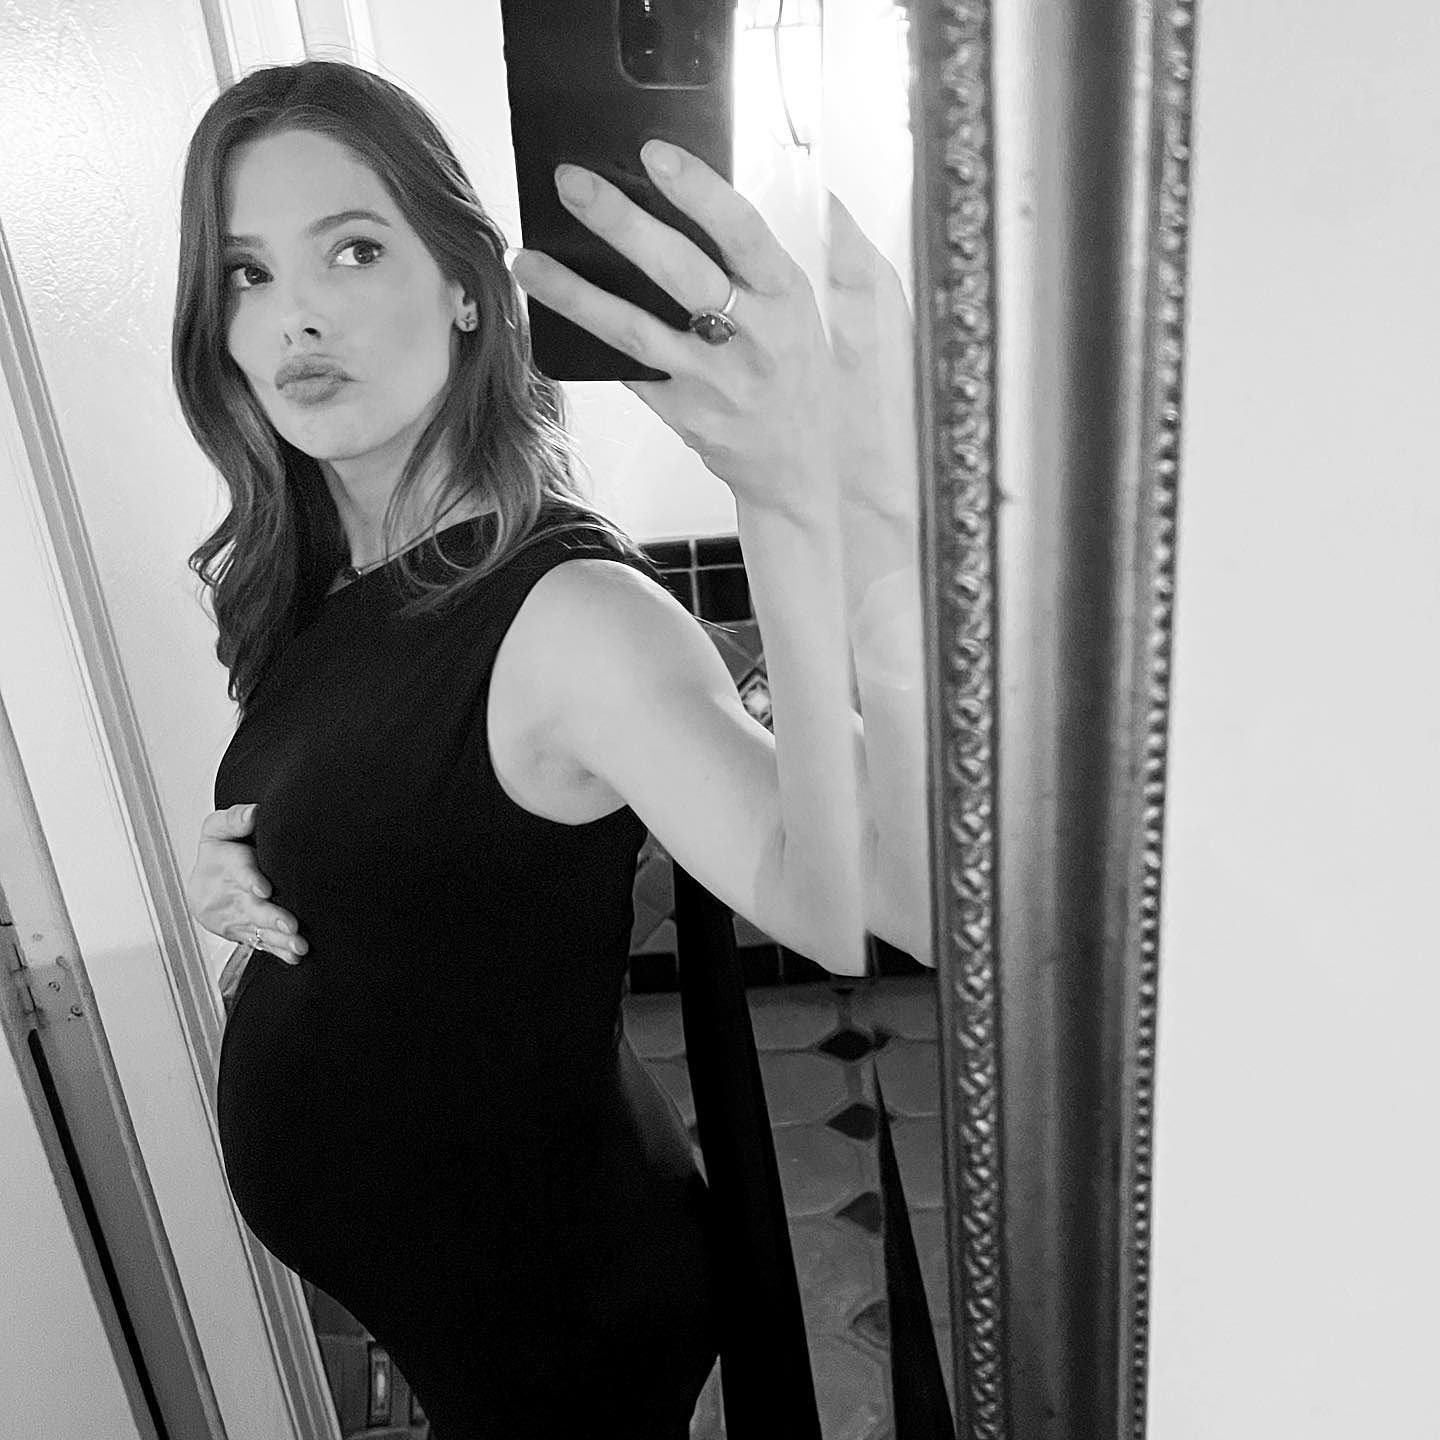 Naked Pregnant Supermodels - Pregnant Celebrities Showing Baby Bumps in 2022: Photos